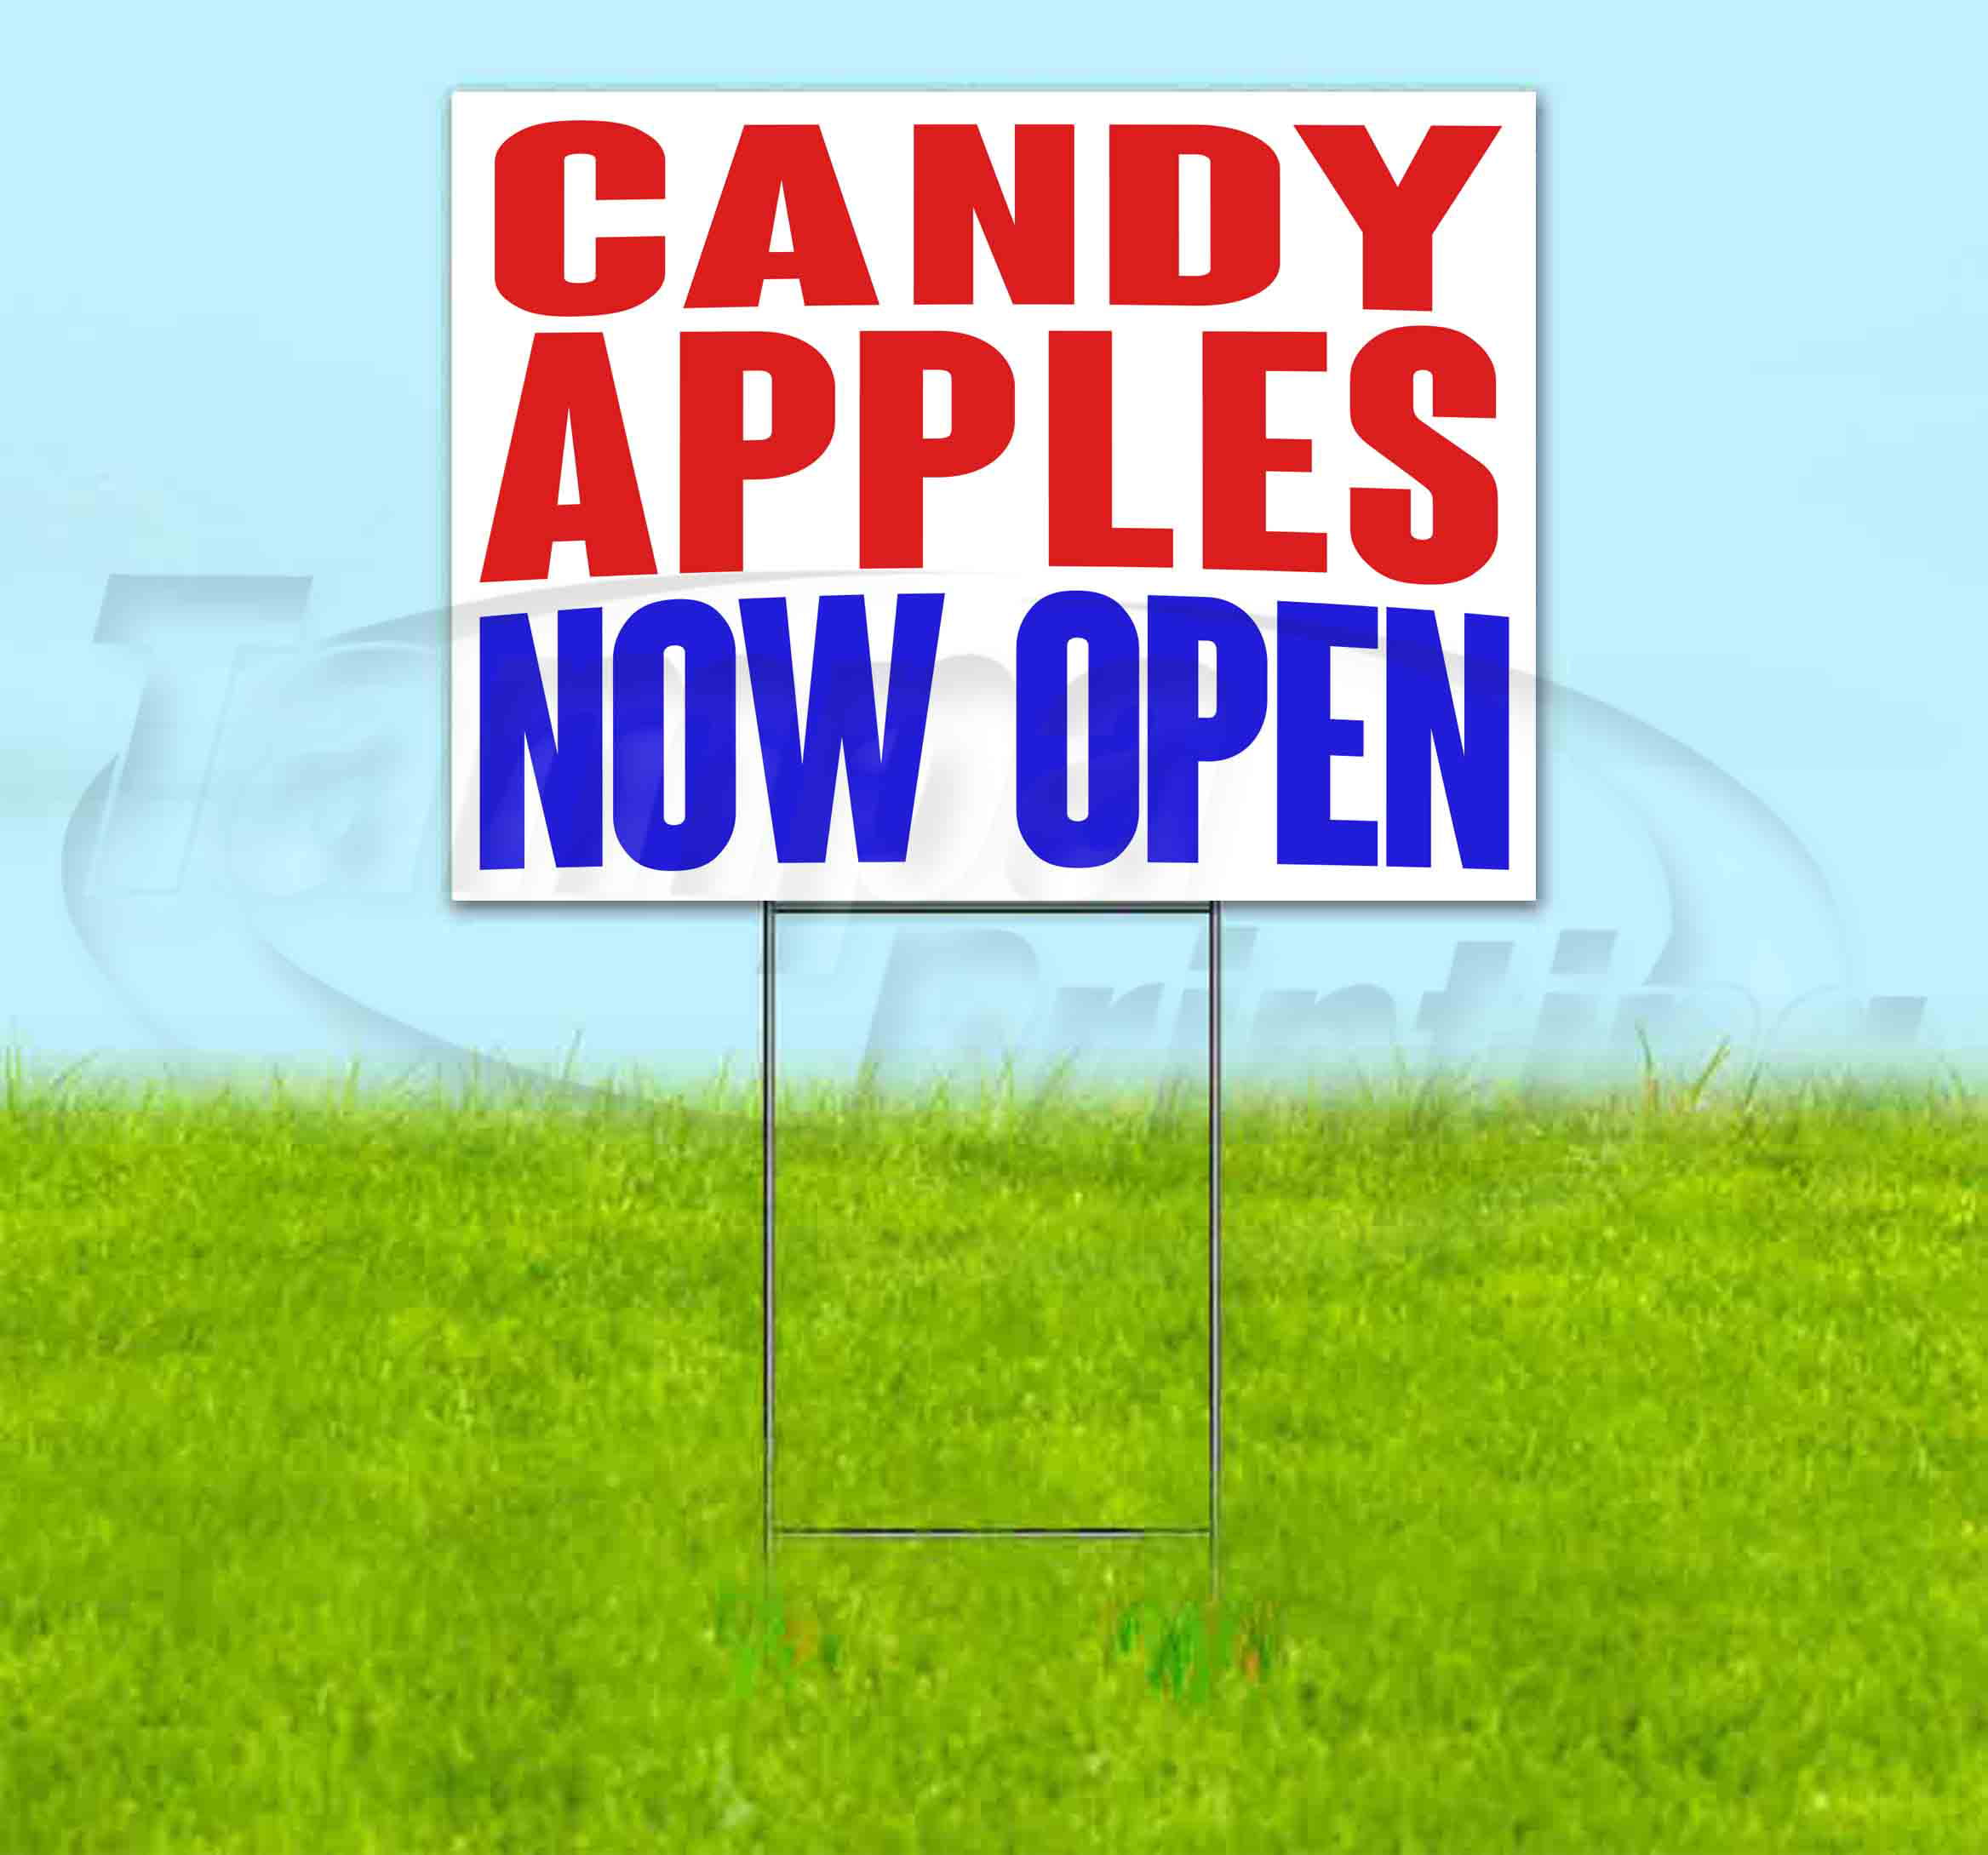 CANDY APPLES 18"x24" Yard Sign & Stake outdoor plastic coroplast window 